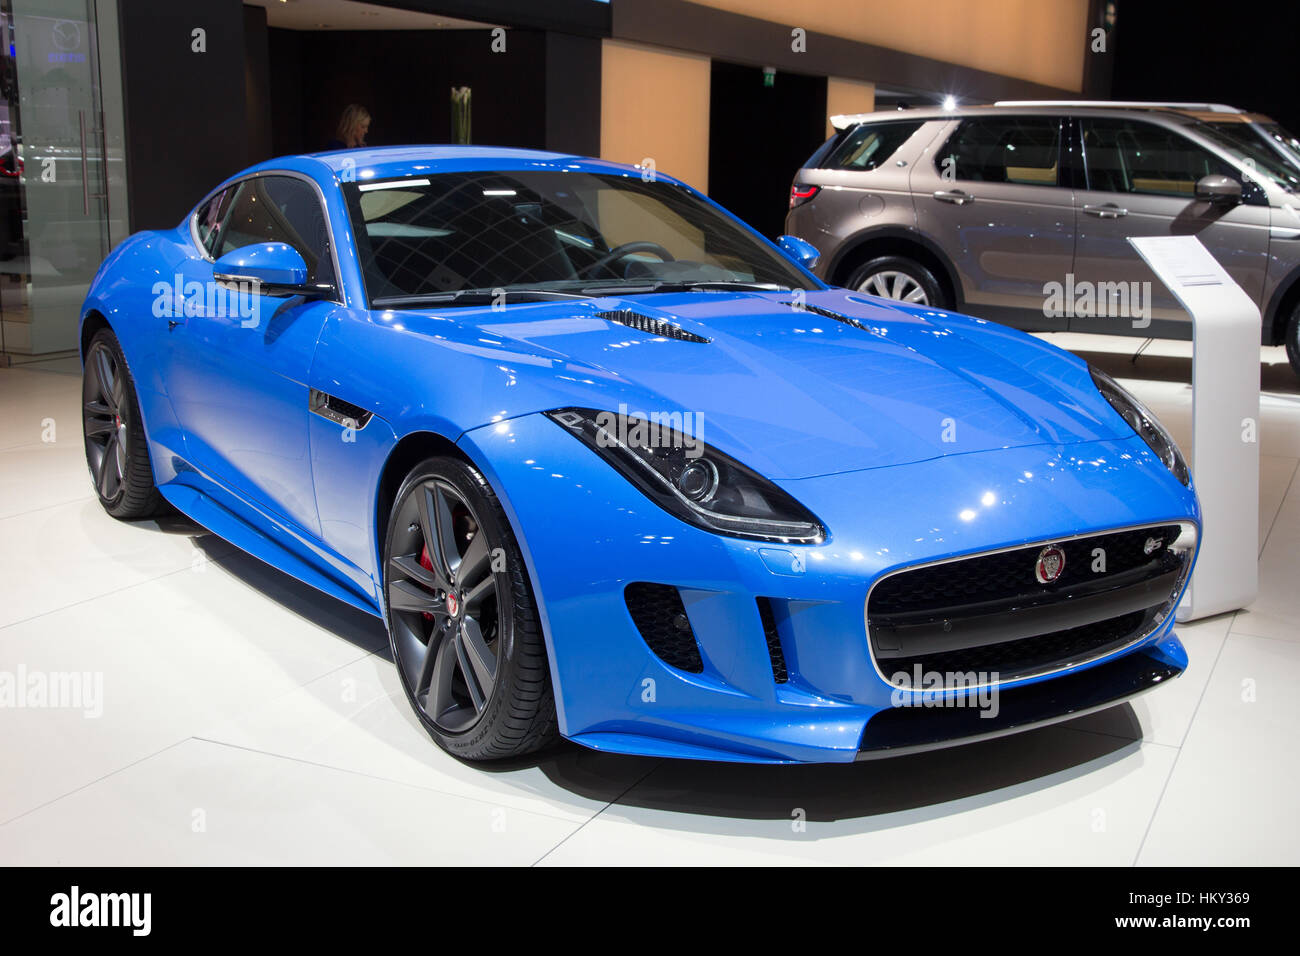 BRUSSELS - JAN 12, 2016: Jaguar F-Type coupe on display at the Brussels Motor Show. Stock Photo